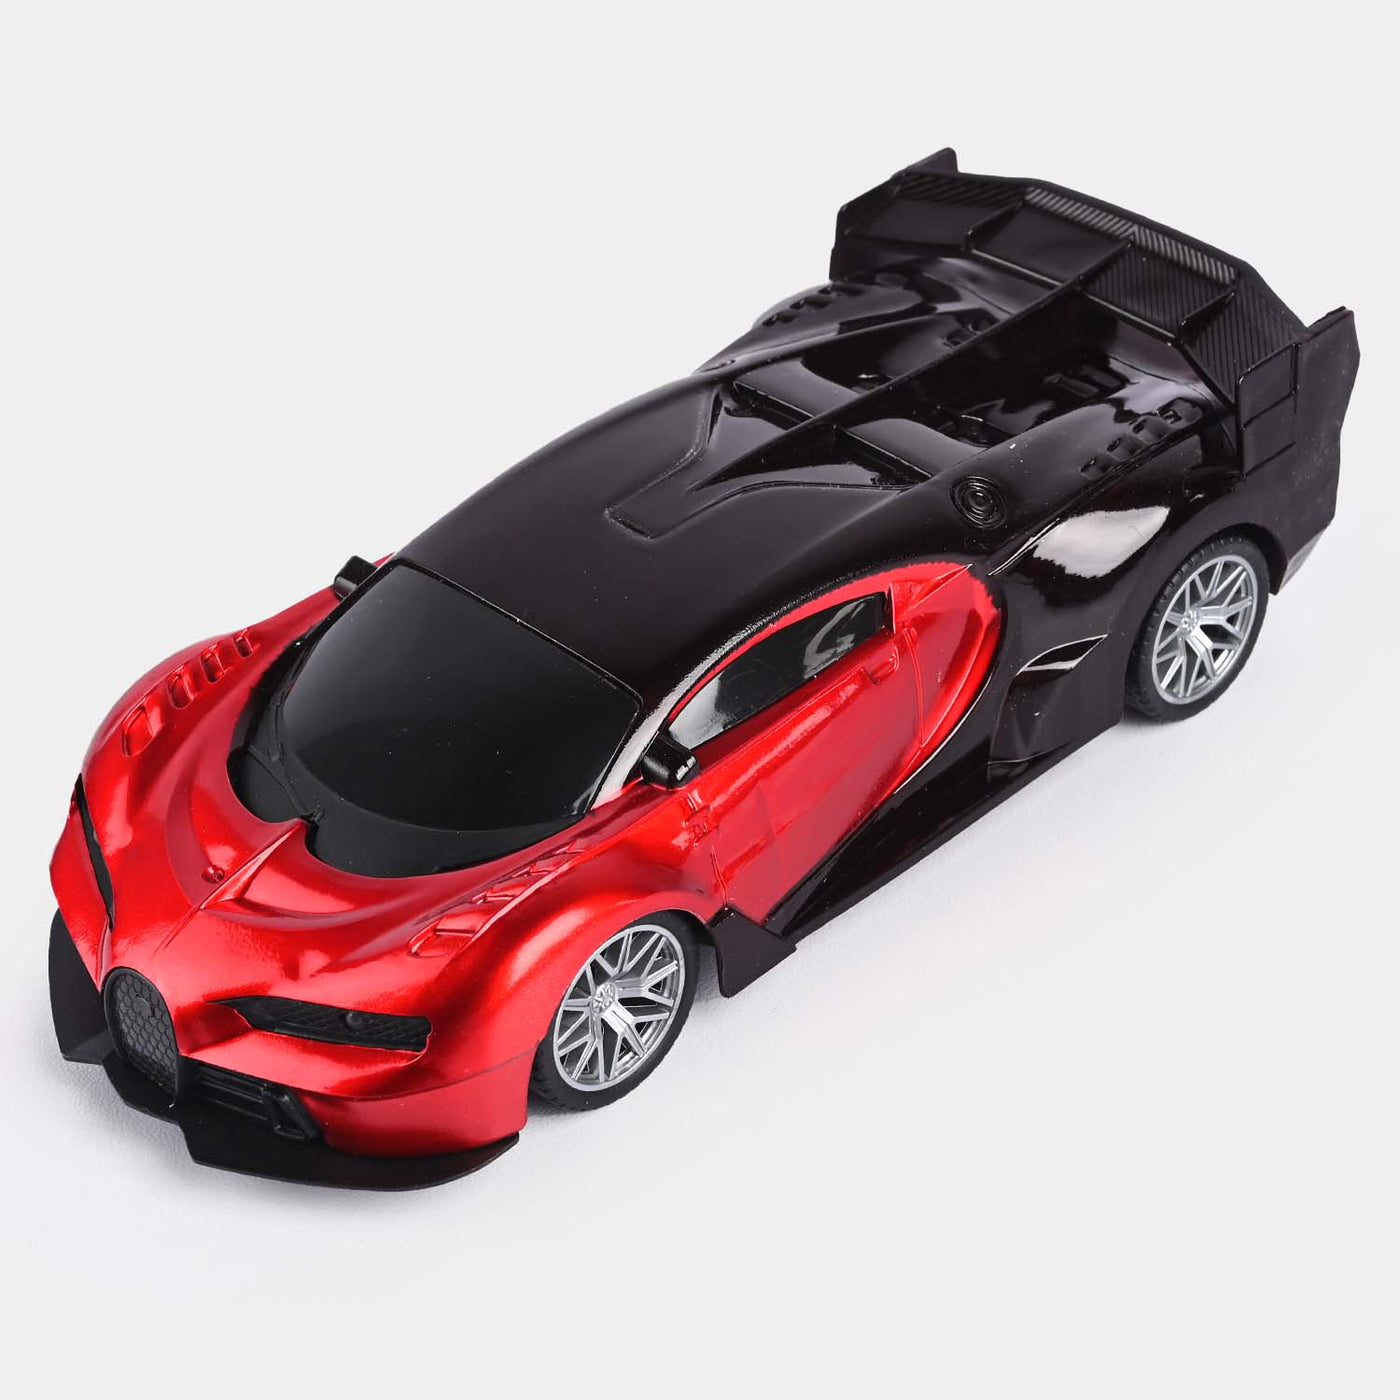 REMOTE CONTROL SPORTS CAR FOR KIDS